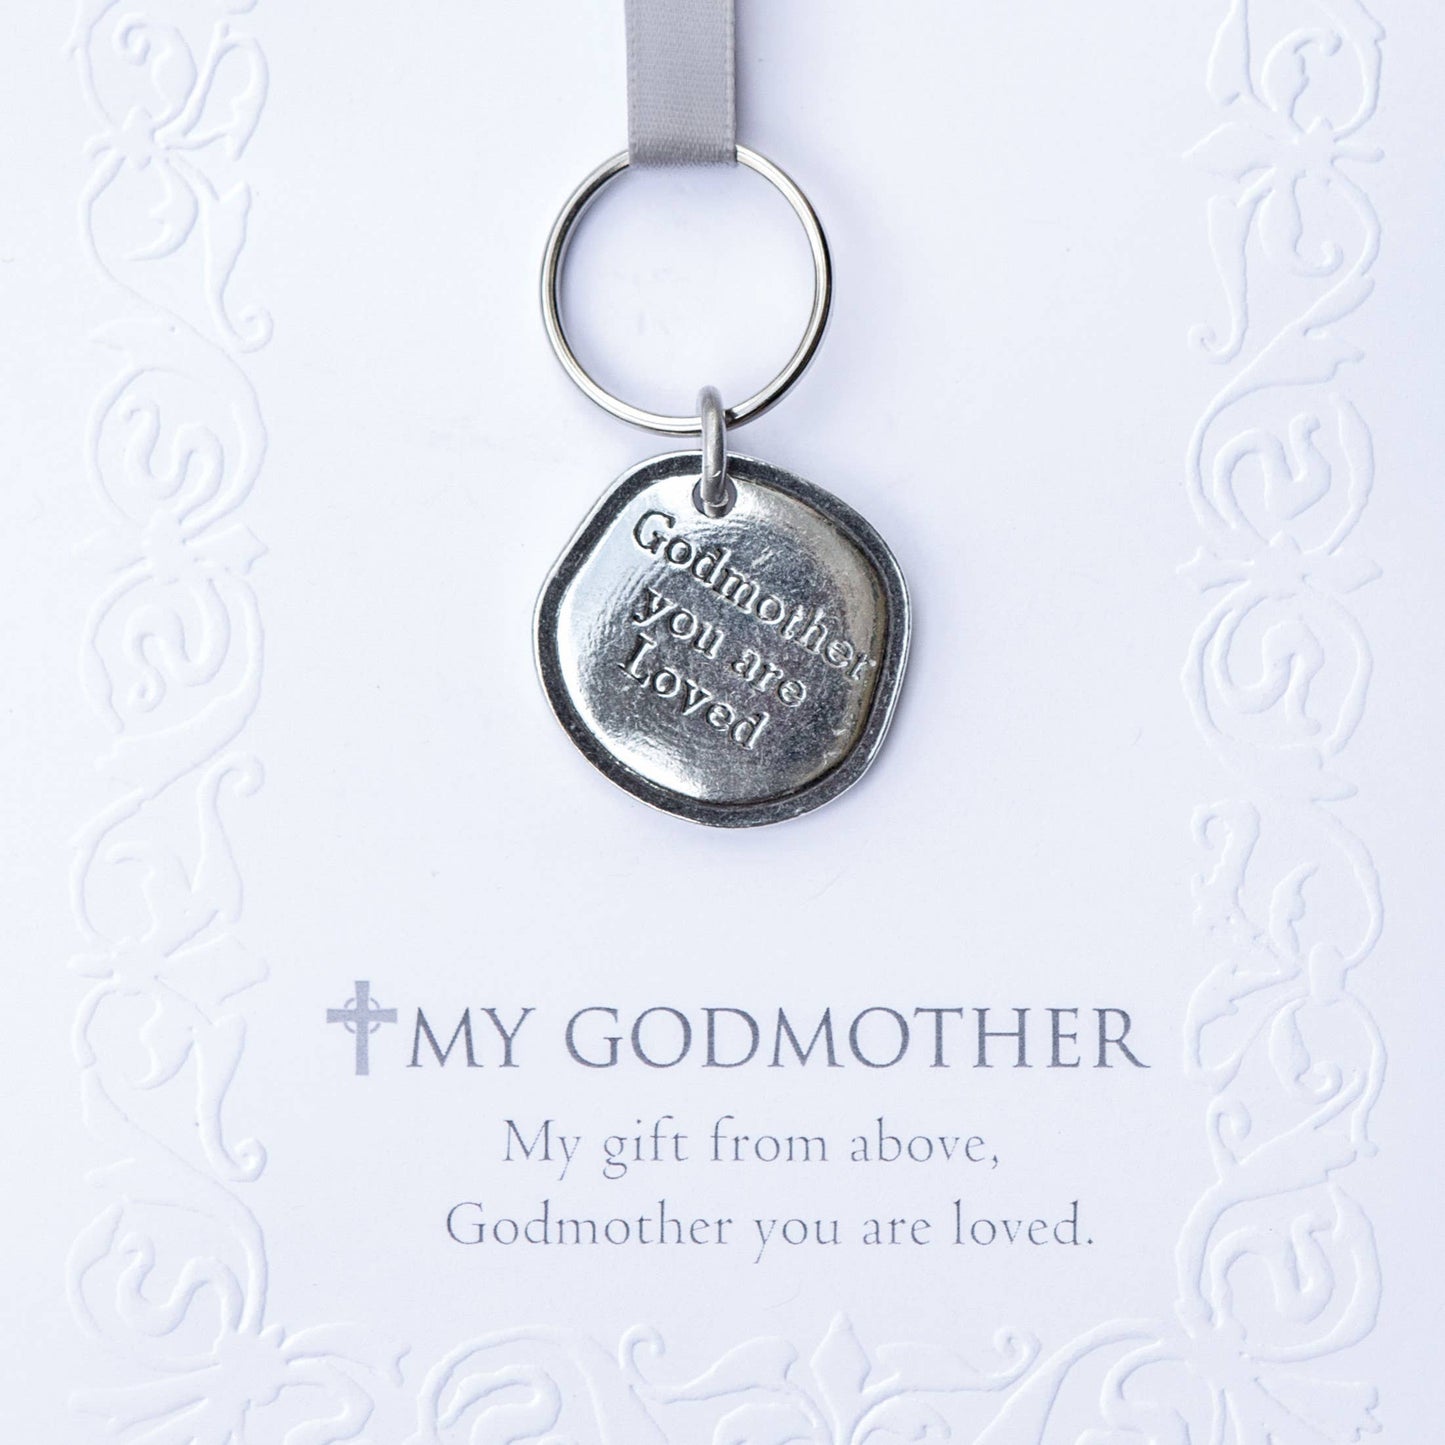 Godmother You Are Loved Pewter Keychain And Card